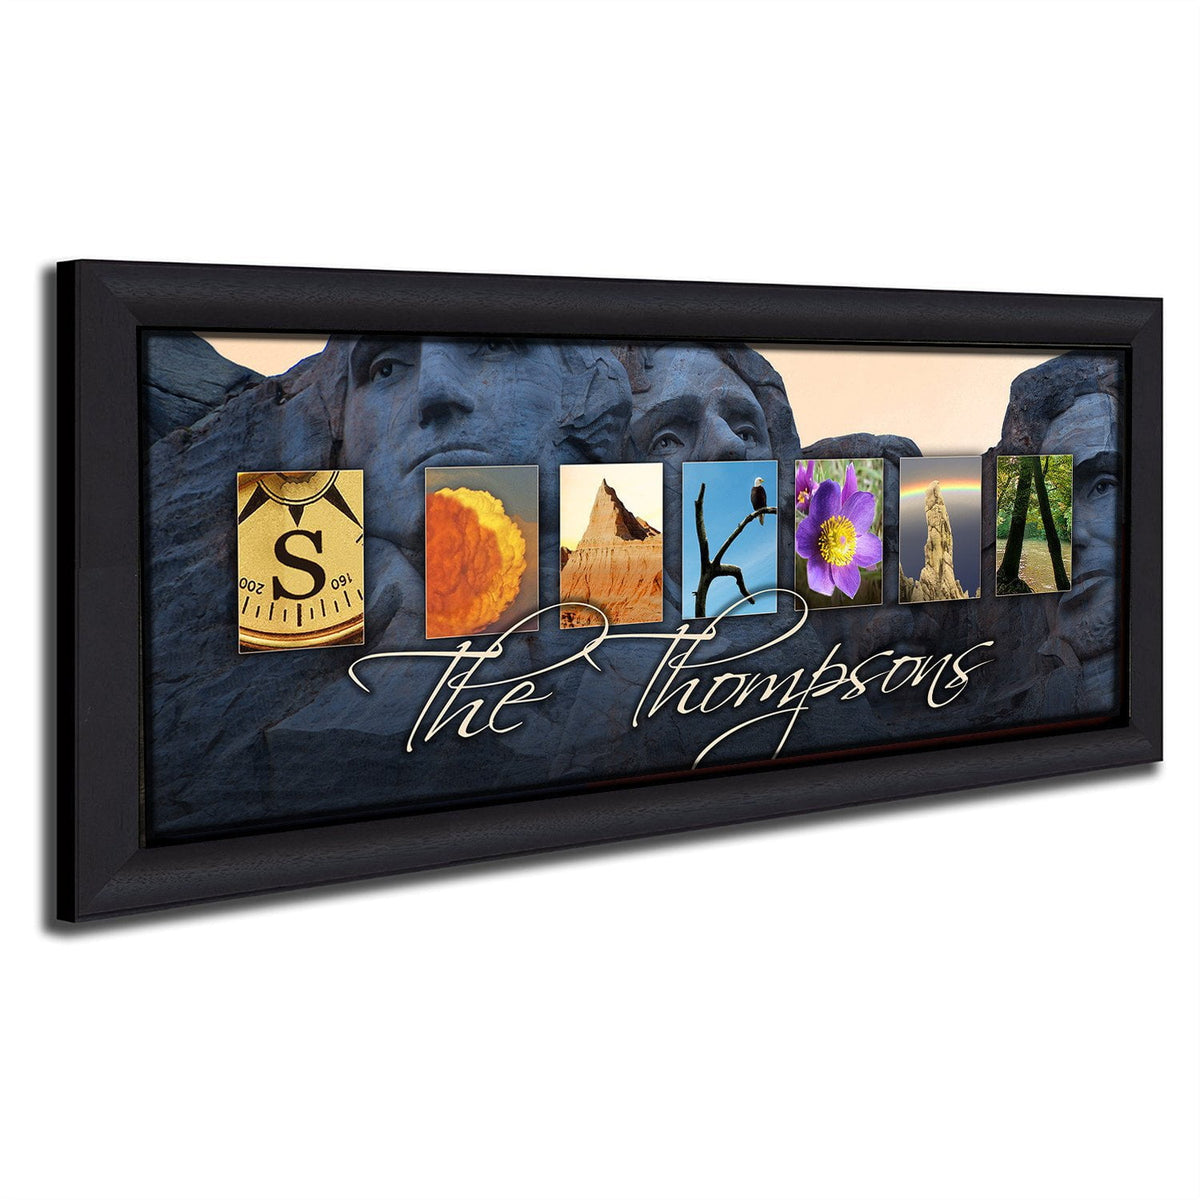 South Dakota canvas art - personalized gift from Personal Prints